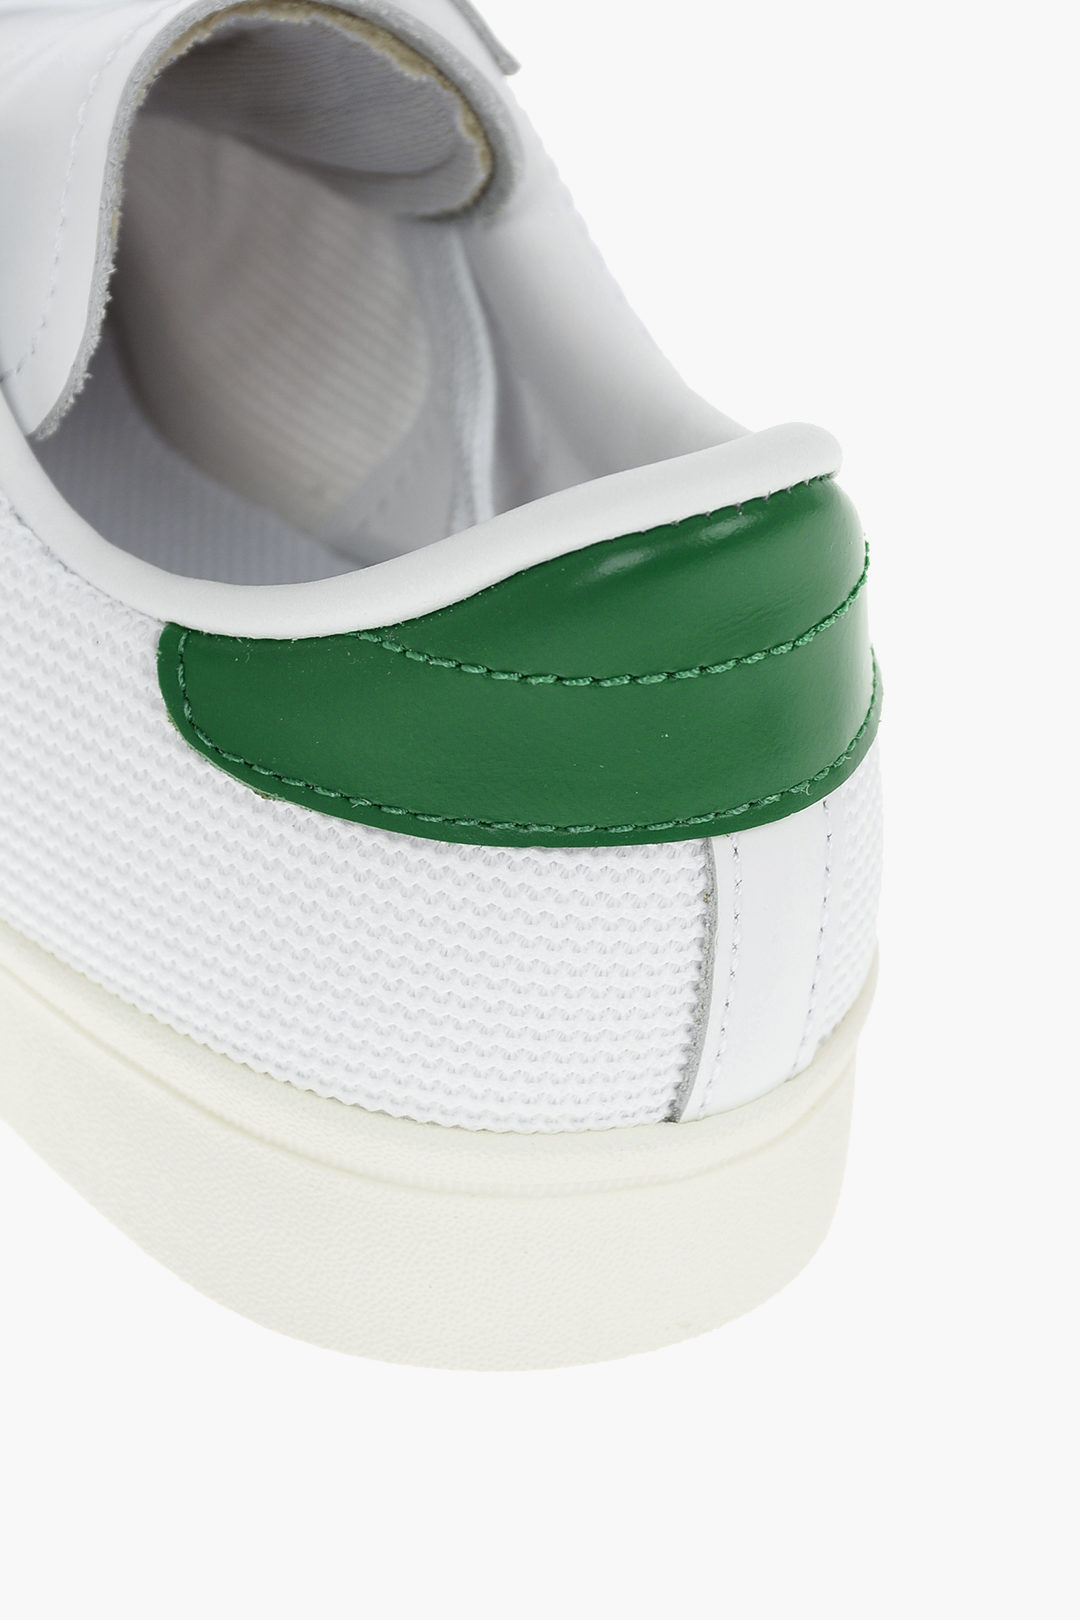 Adidas Chevron Fabric ROD LAVER VIN Low-Top Sneakers Leather Details unisex men women - Glamood Outlet